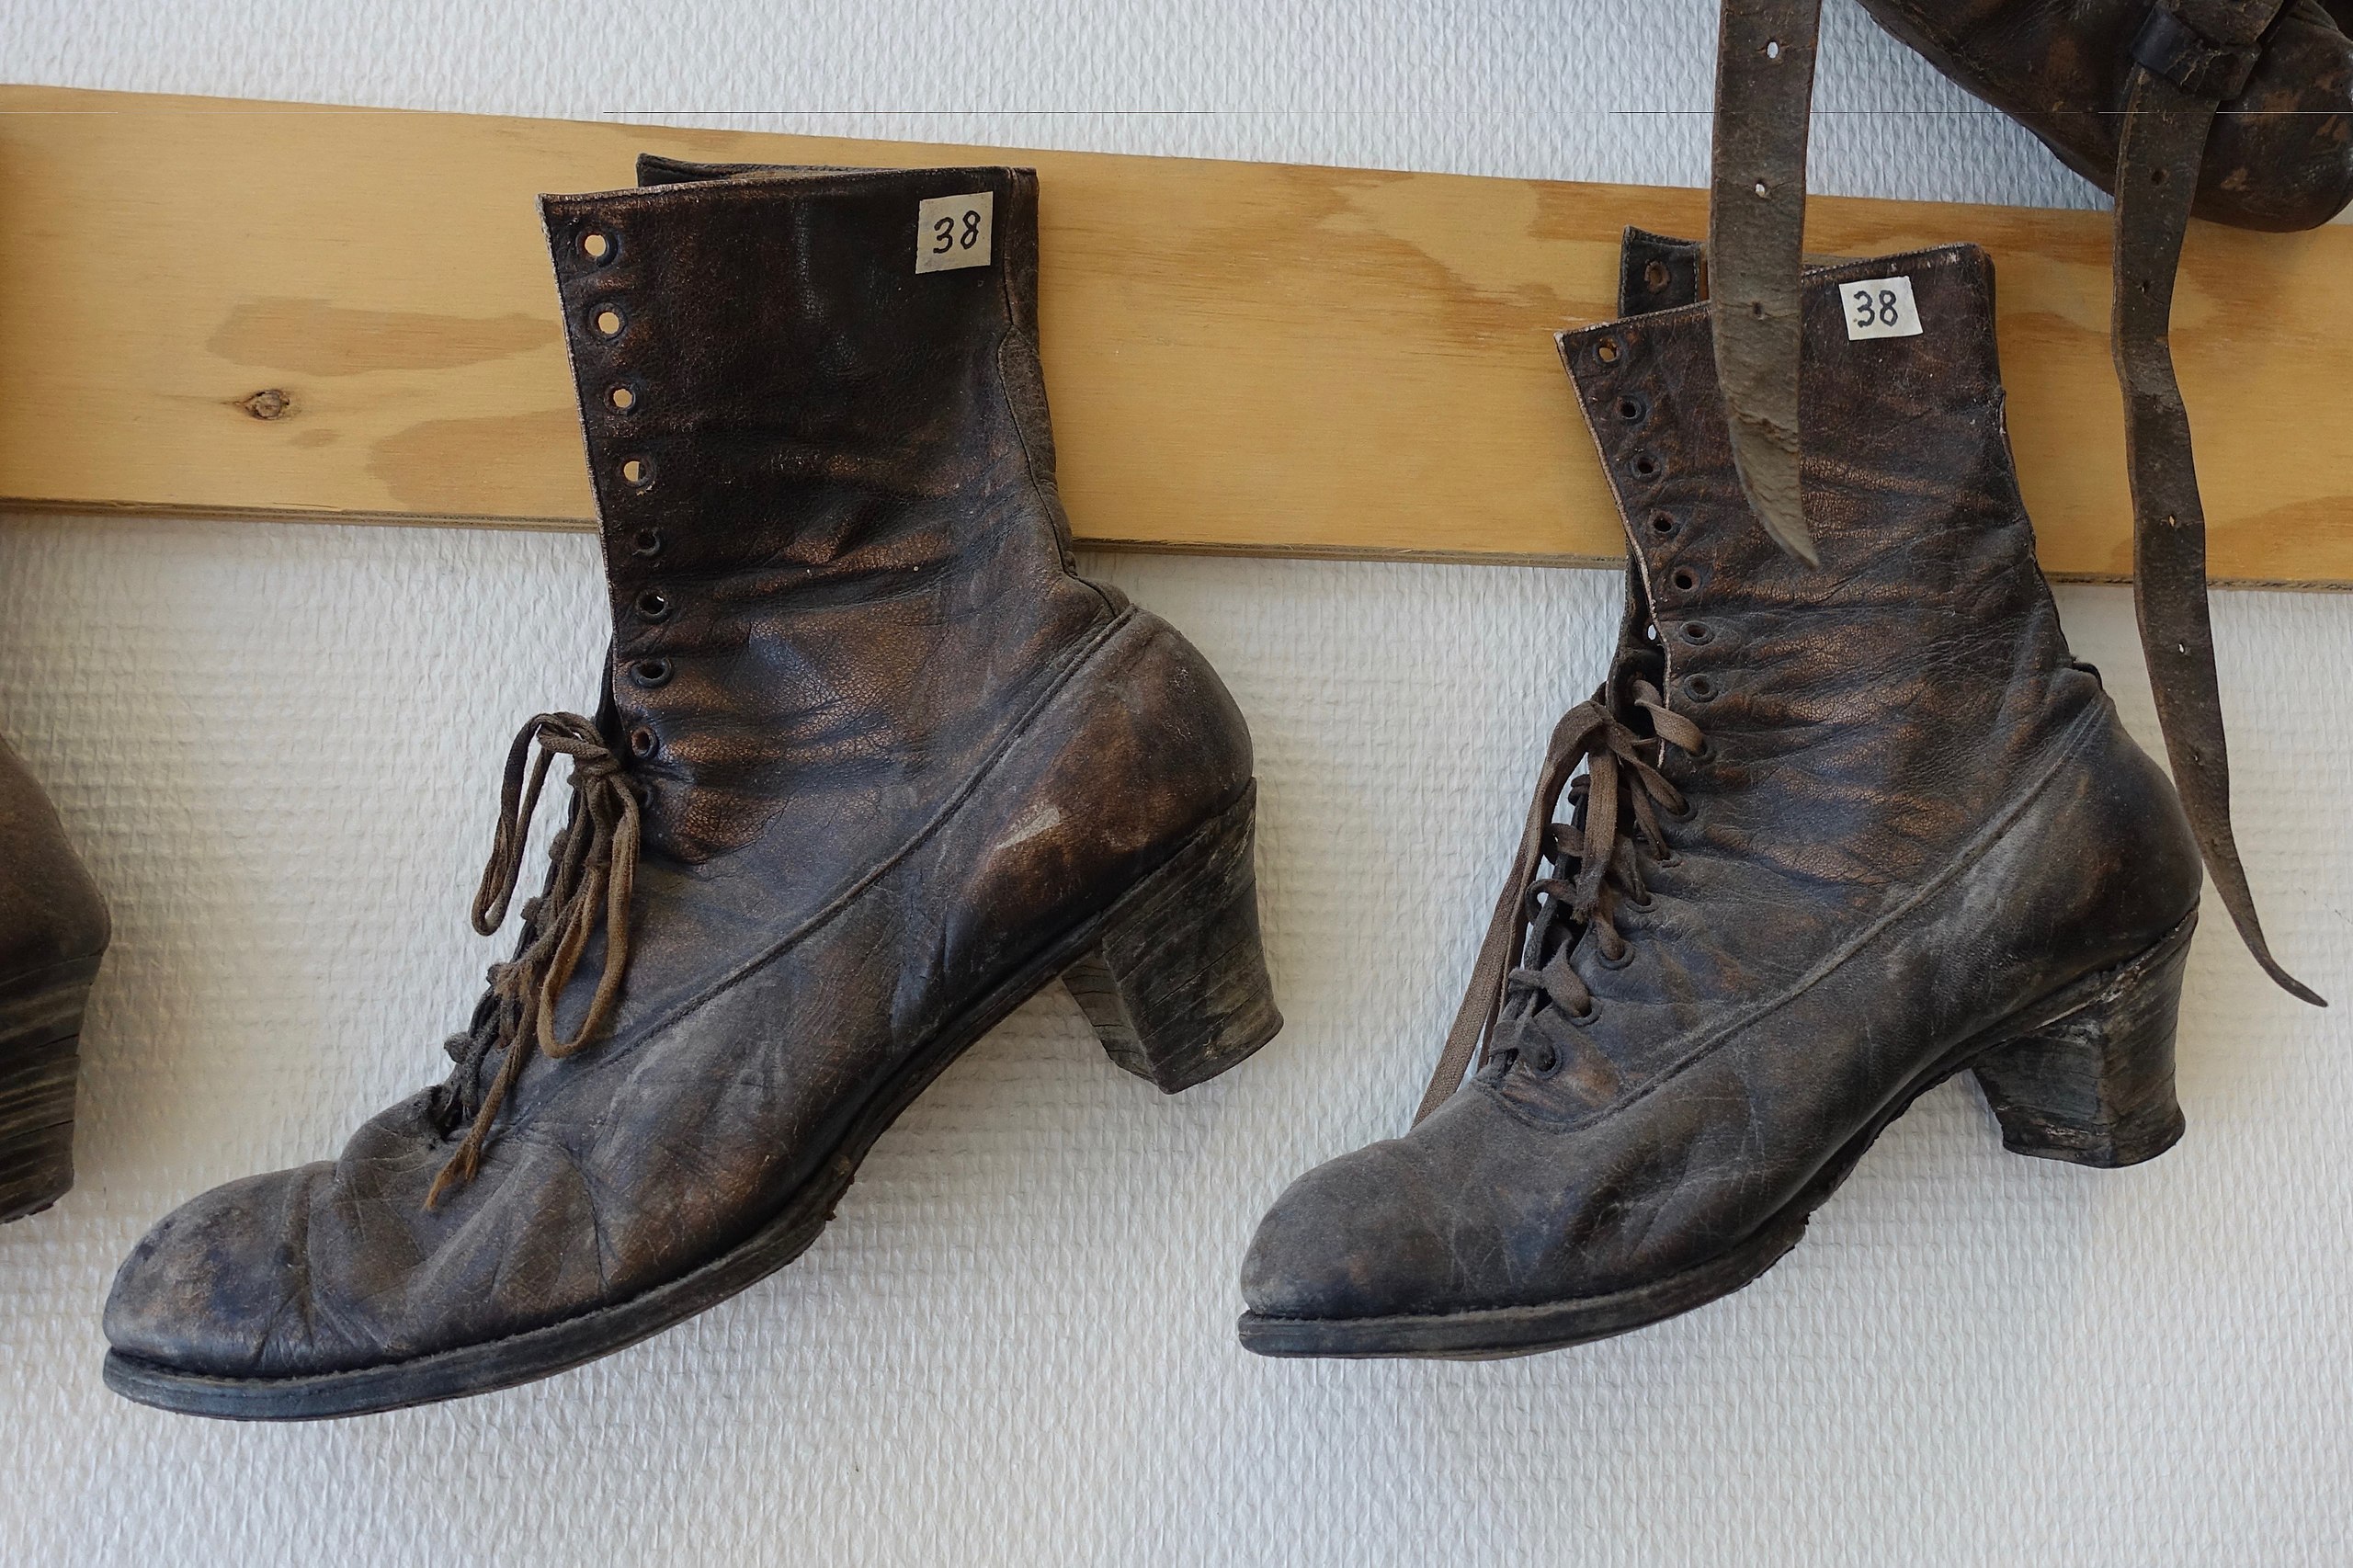 File:Old worn leather footwear (women's shoes boots) (